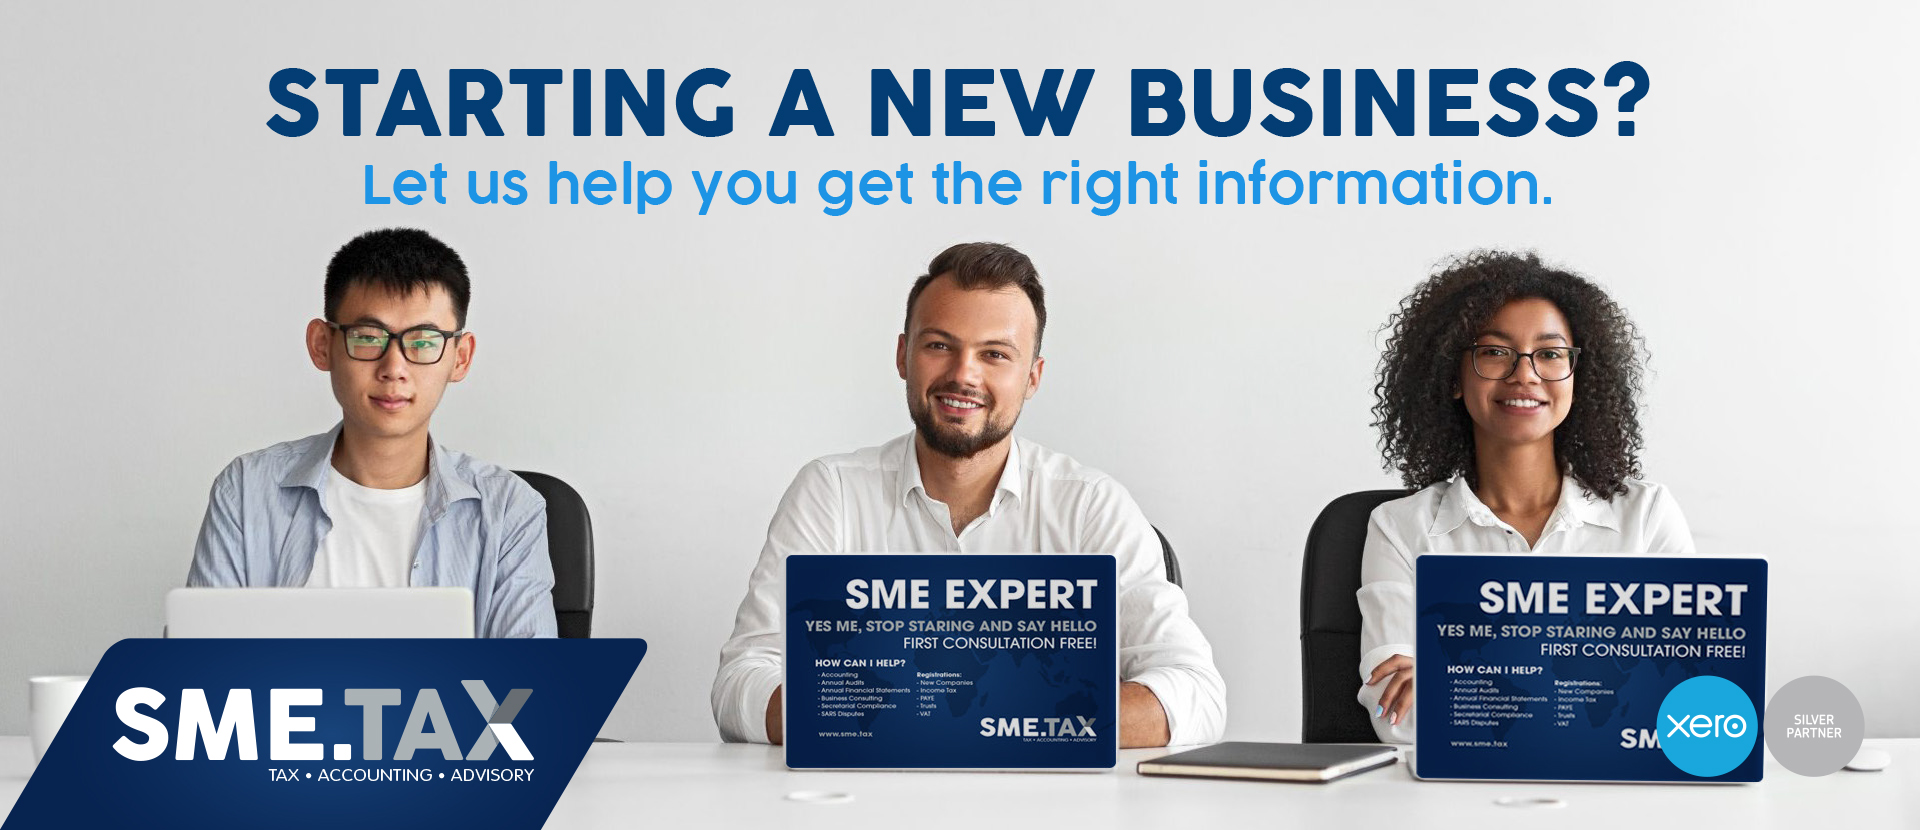 SME.TAX Blog (Accessing Information)